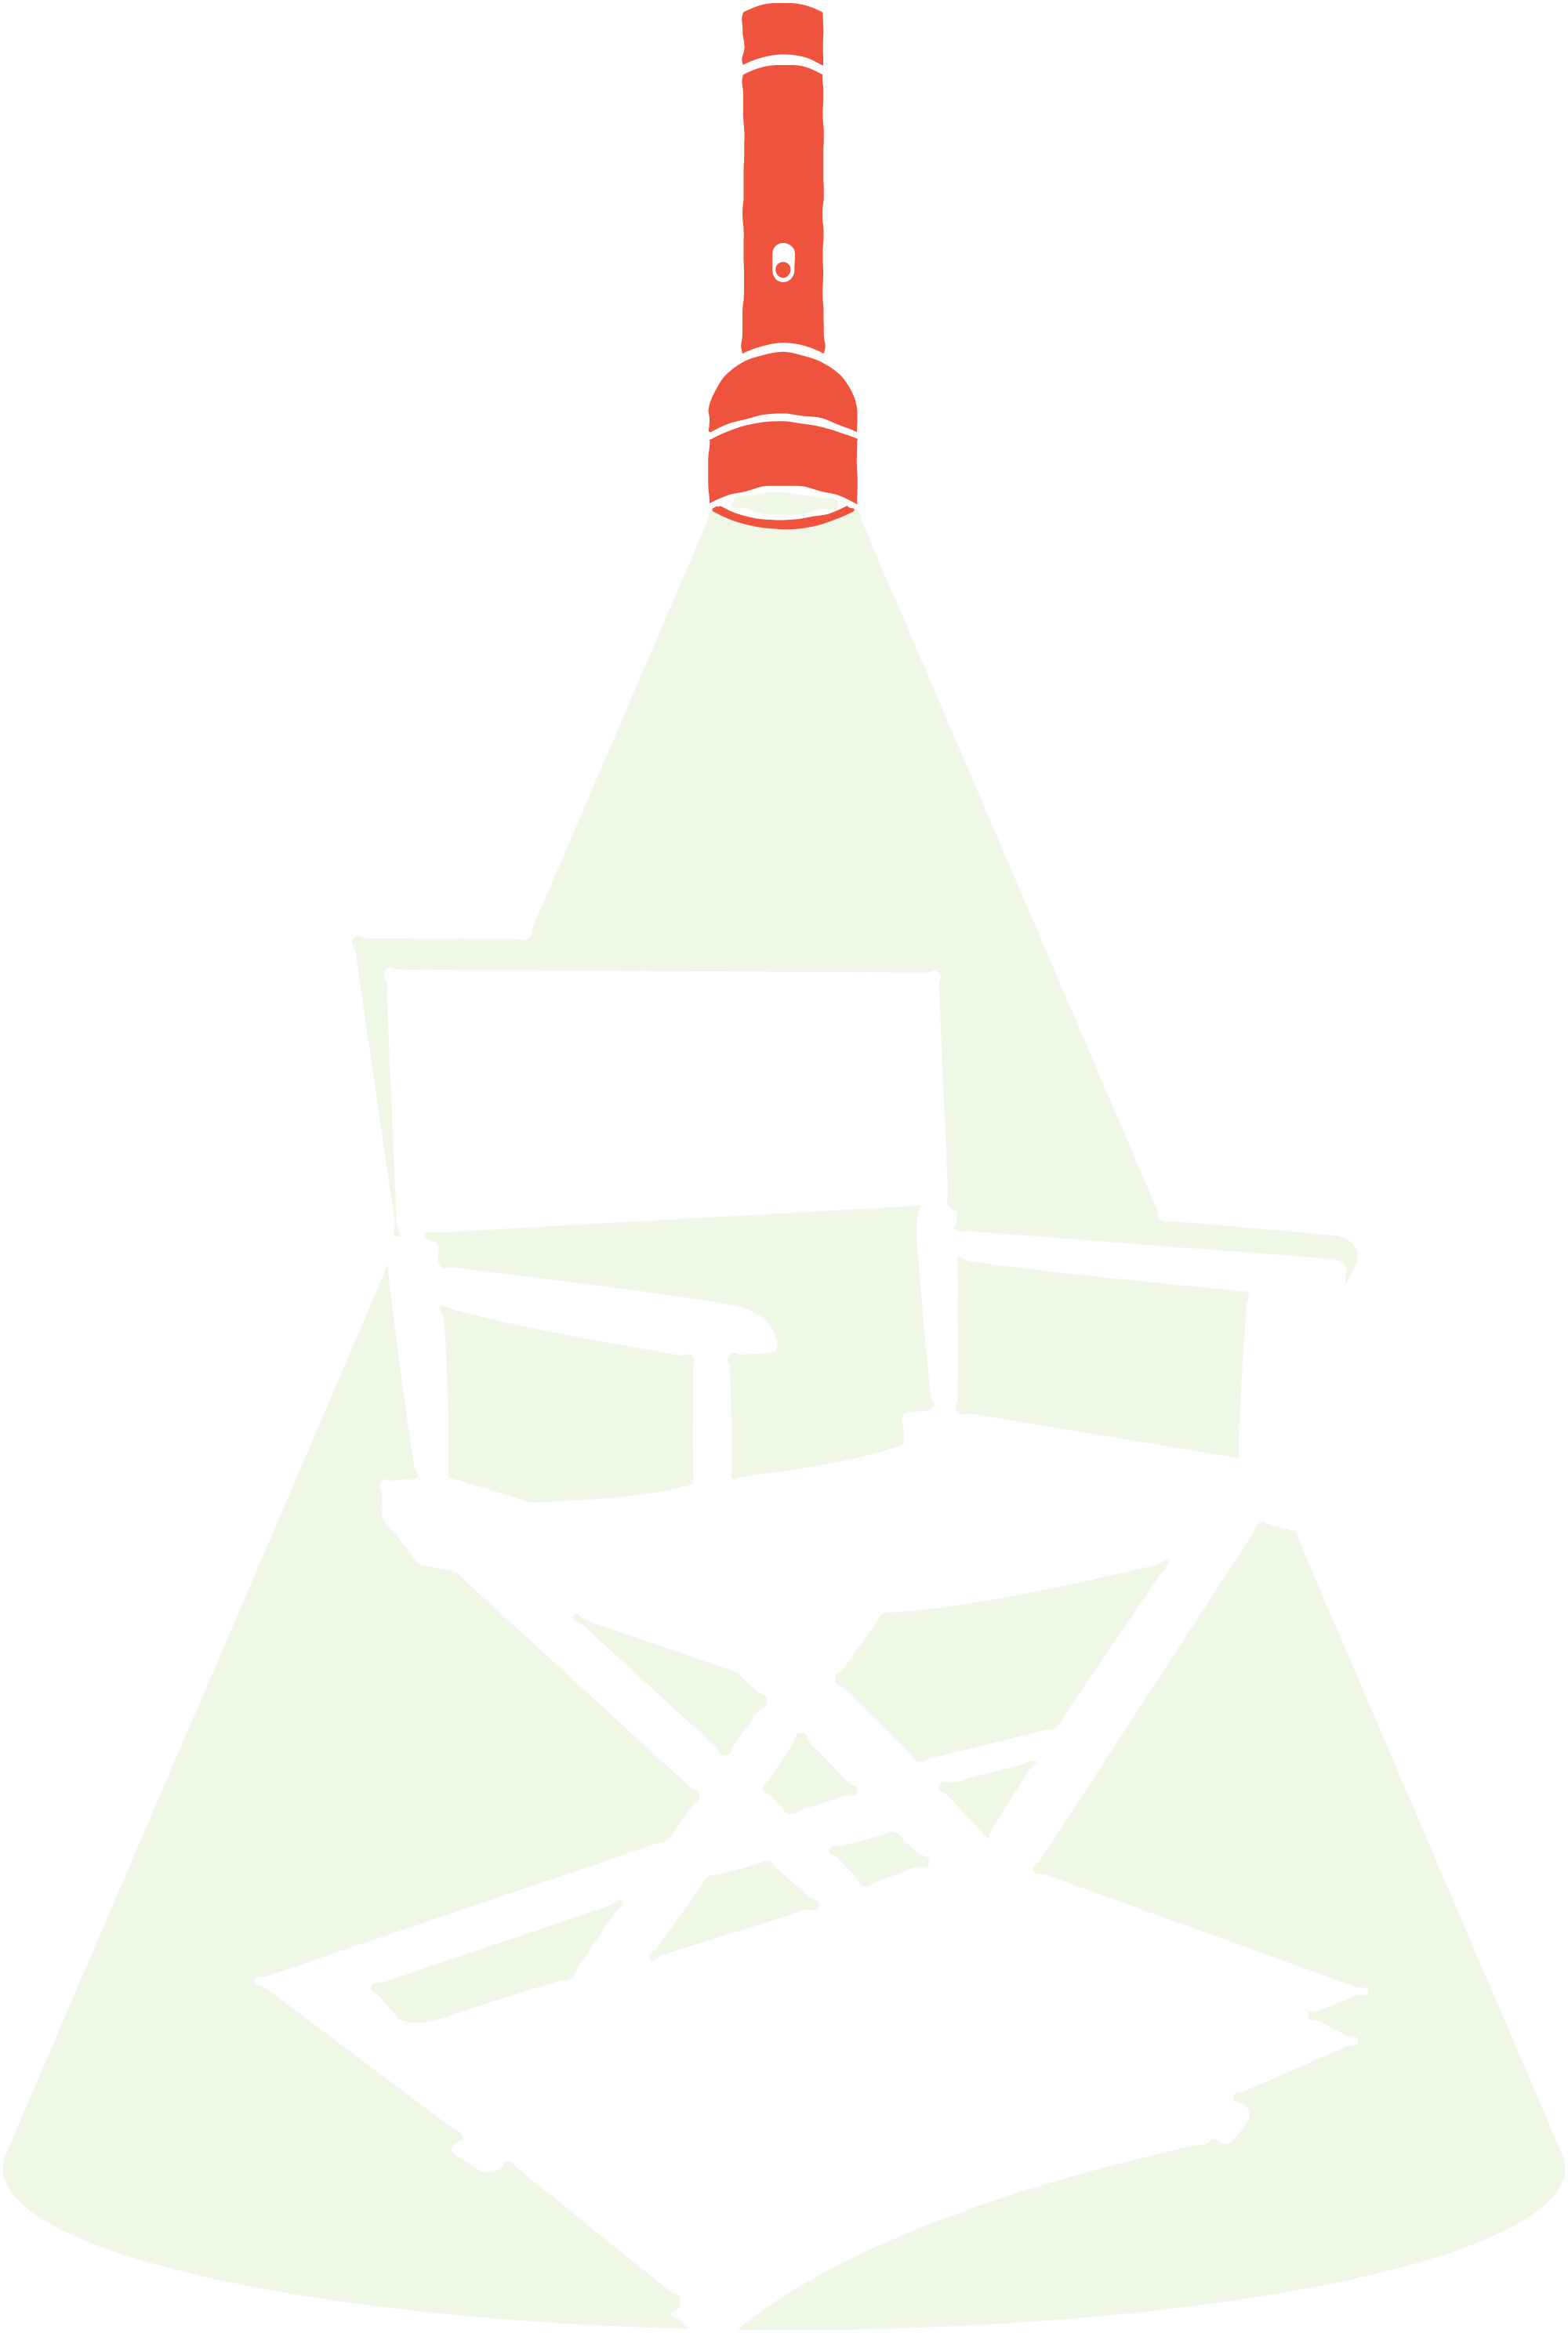 Flashlight lighting up a director's chair graphic